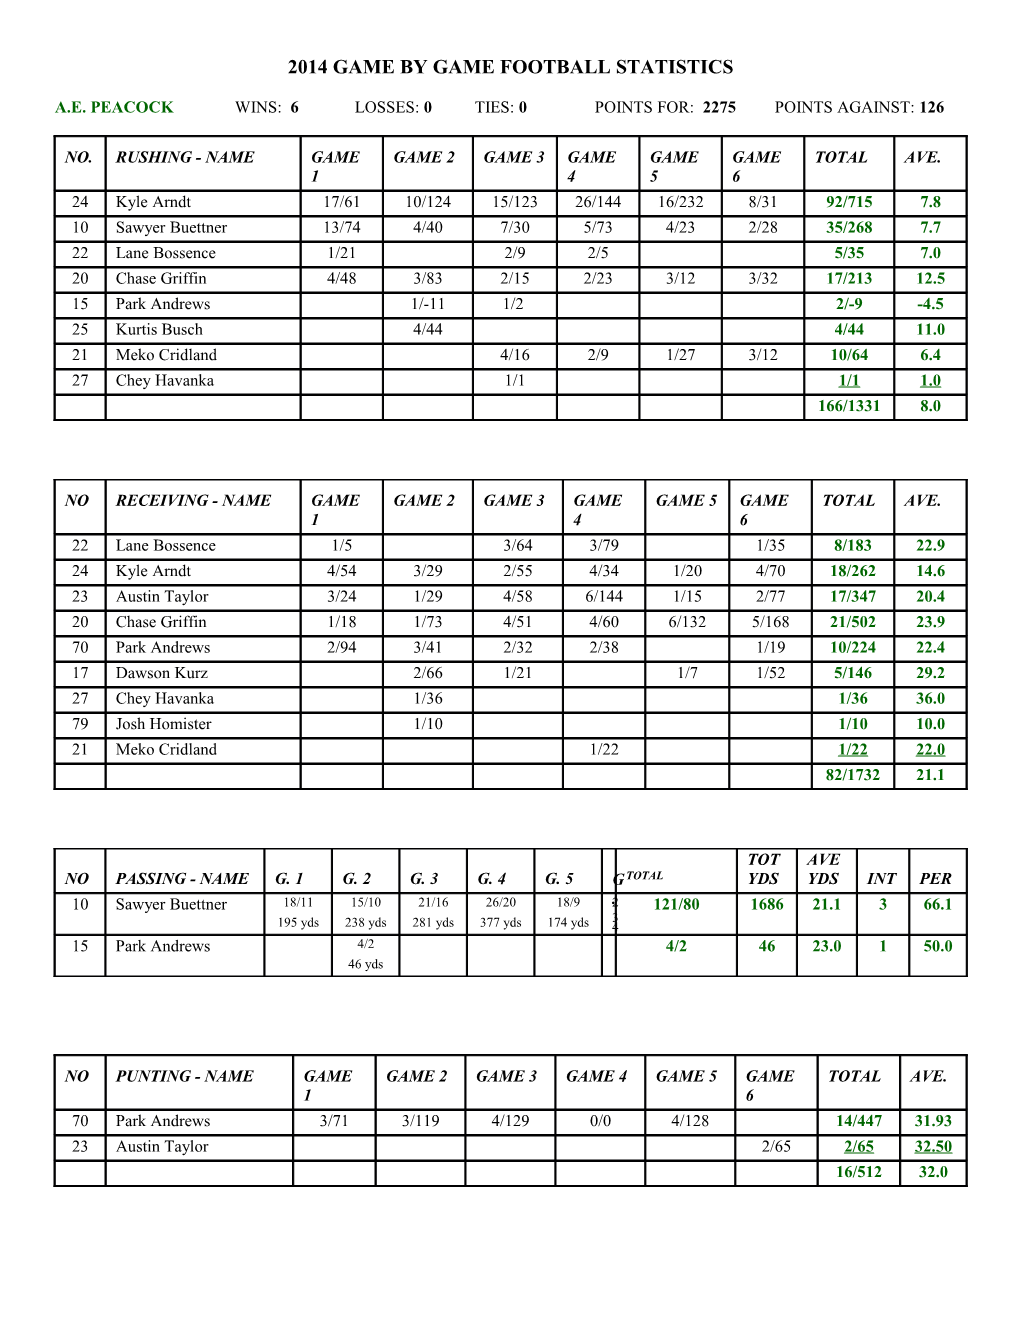 2014 Game by Game Football Statistics